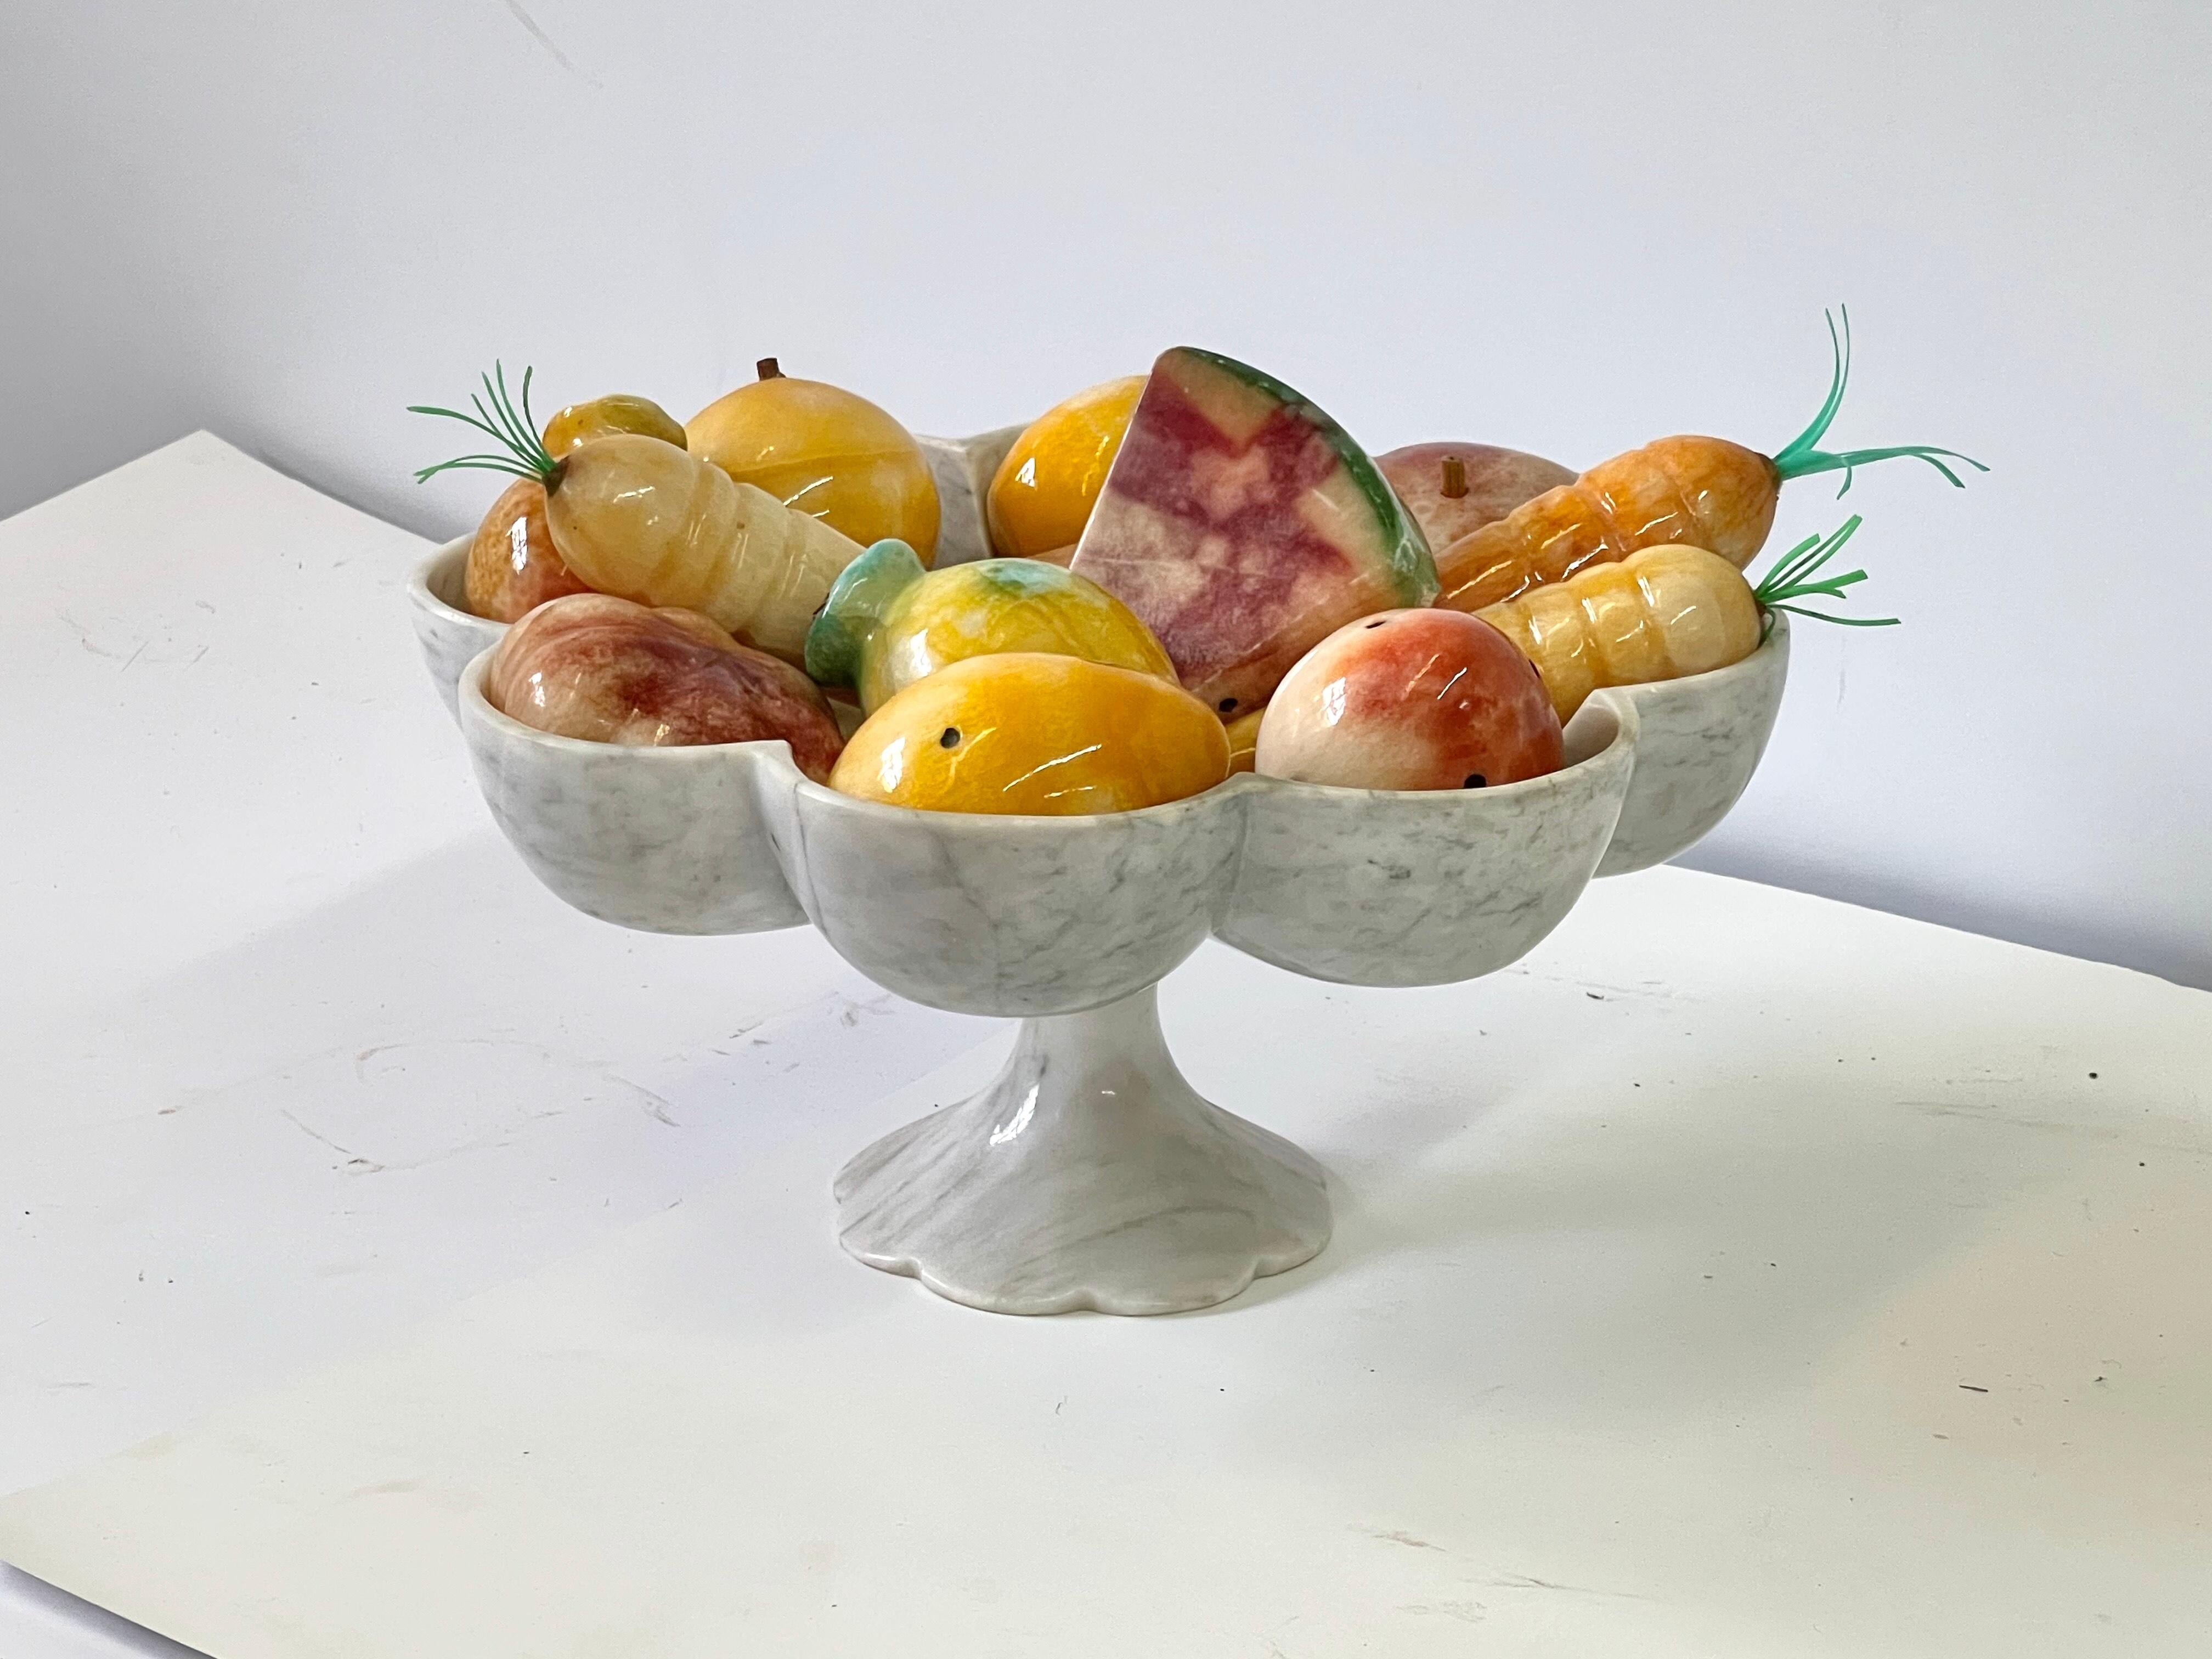 Italian 20th century beautifully scalloped tazza in gray and white marble. The tazza is holding a set of colorful fruits and vegetables of various polished marbles.